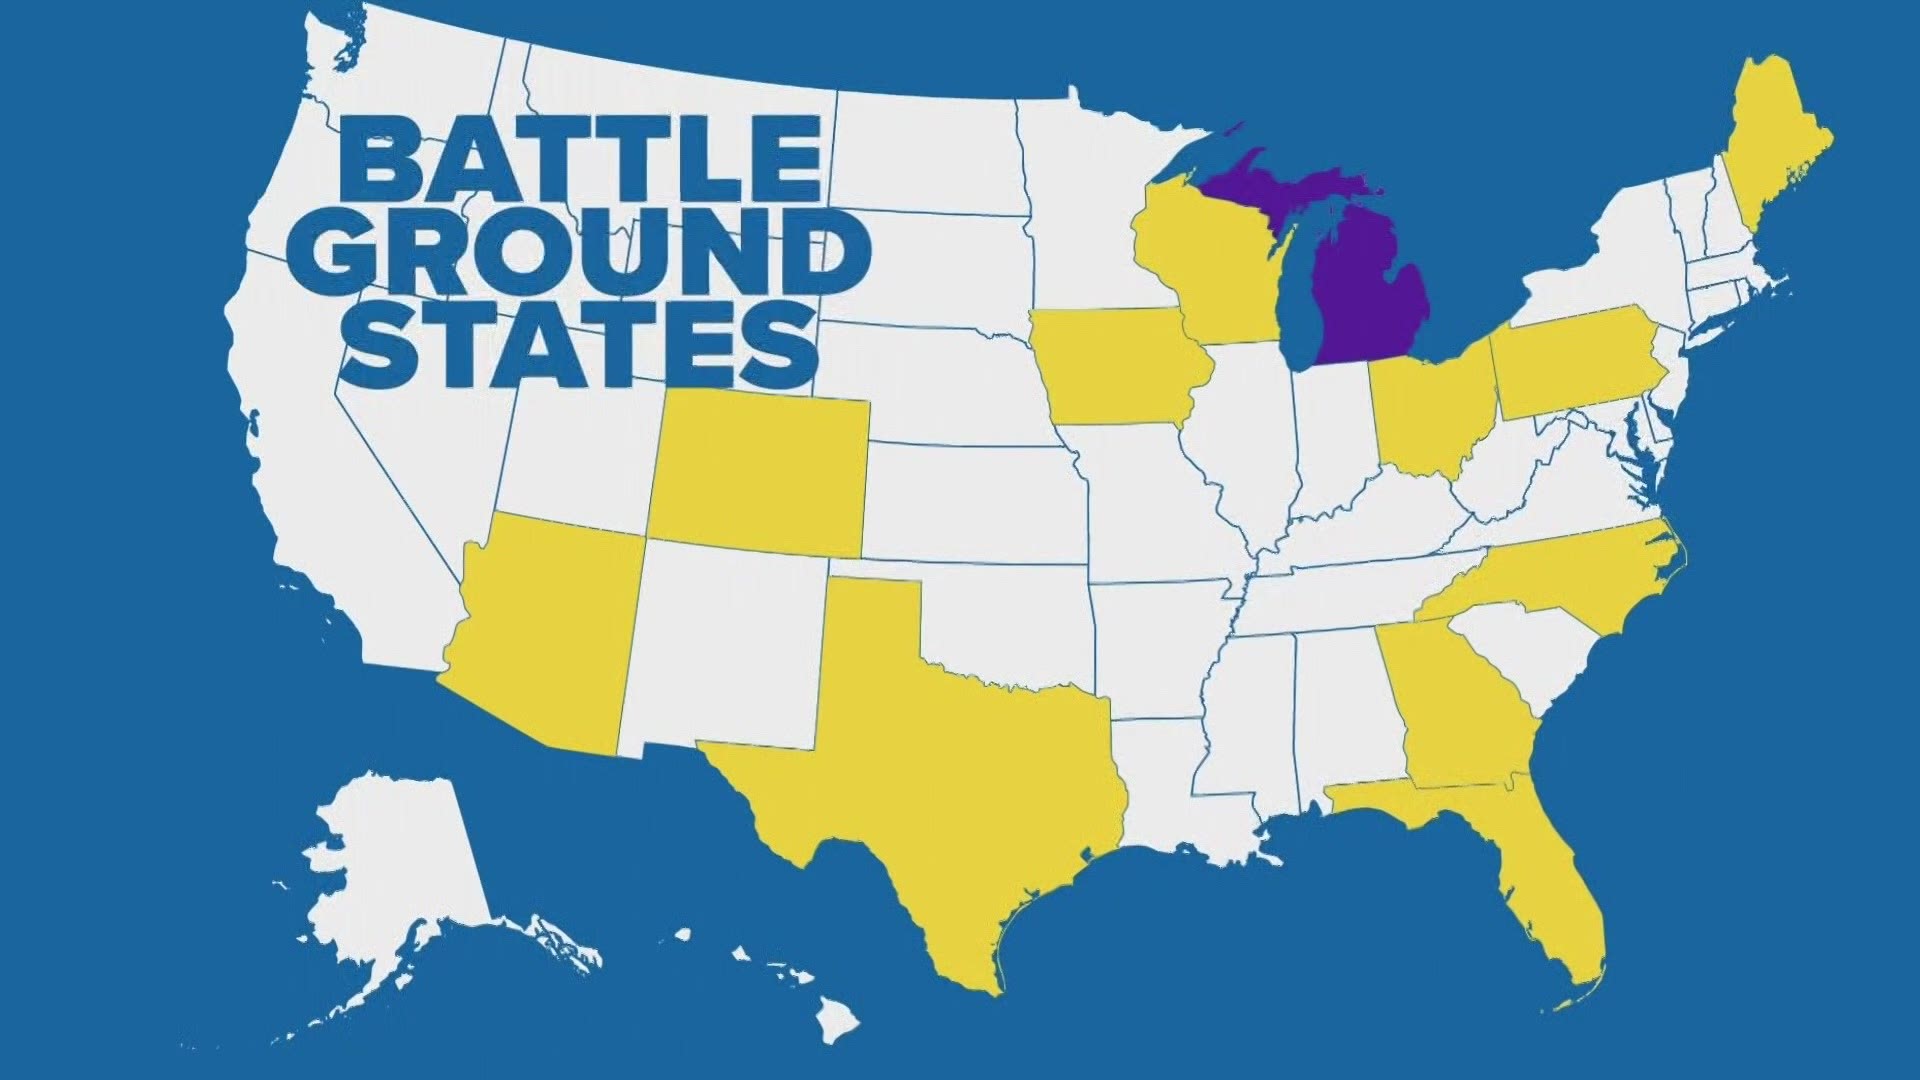 A battleground state is the same thing as a swing state, and can flip red or blue in an election.